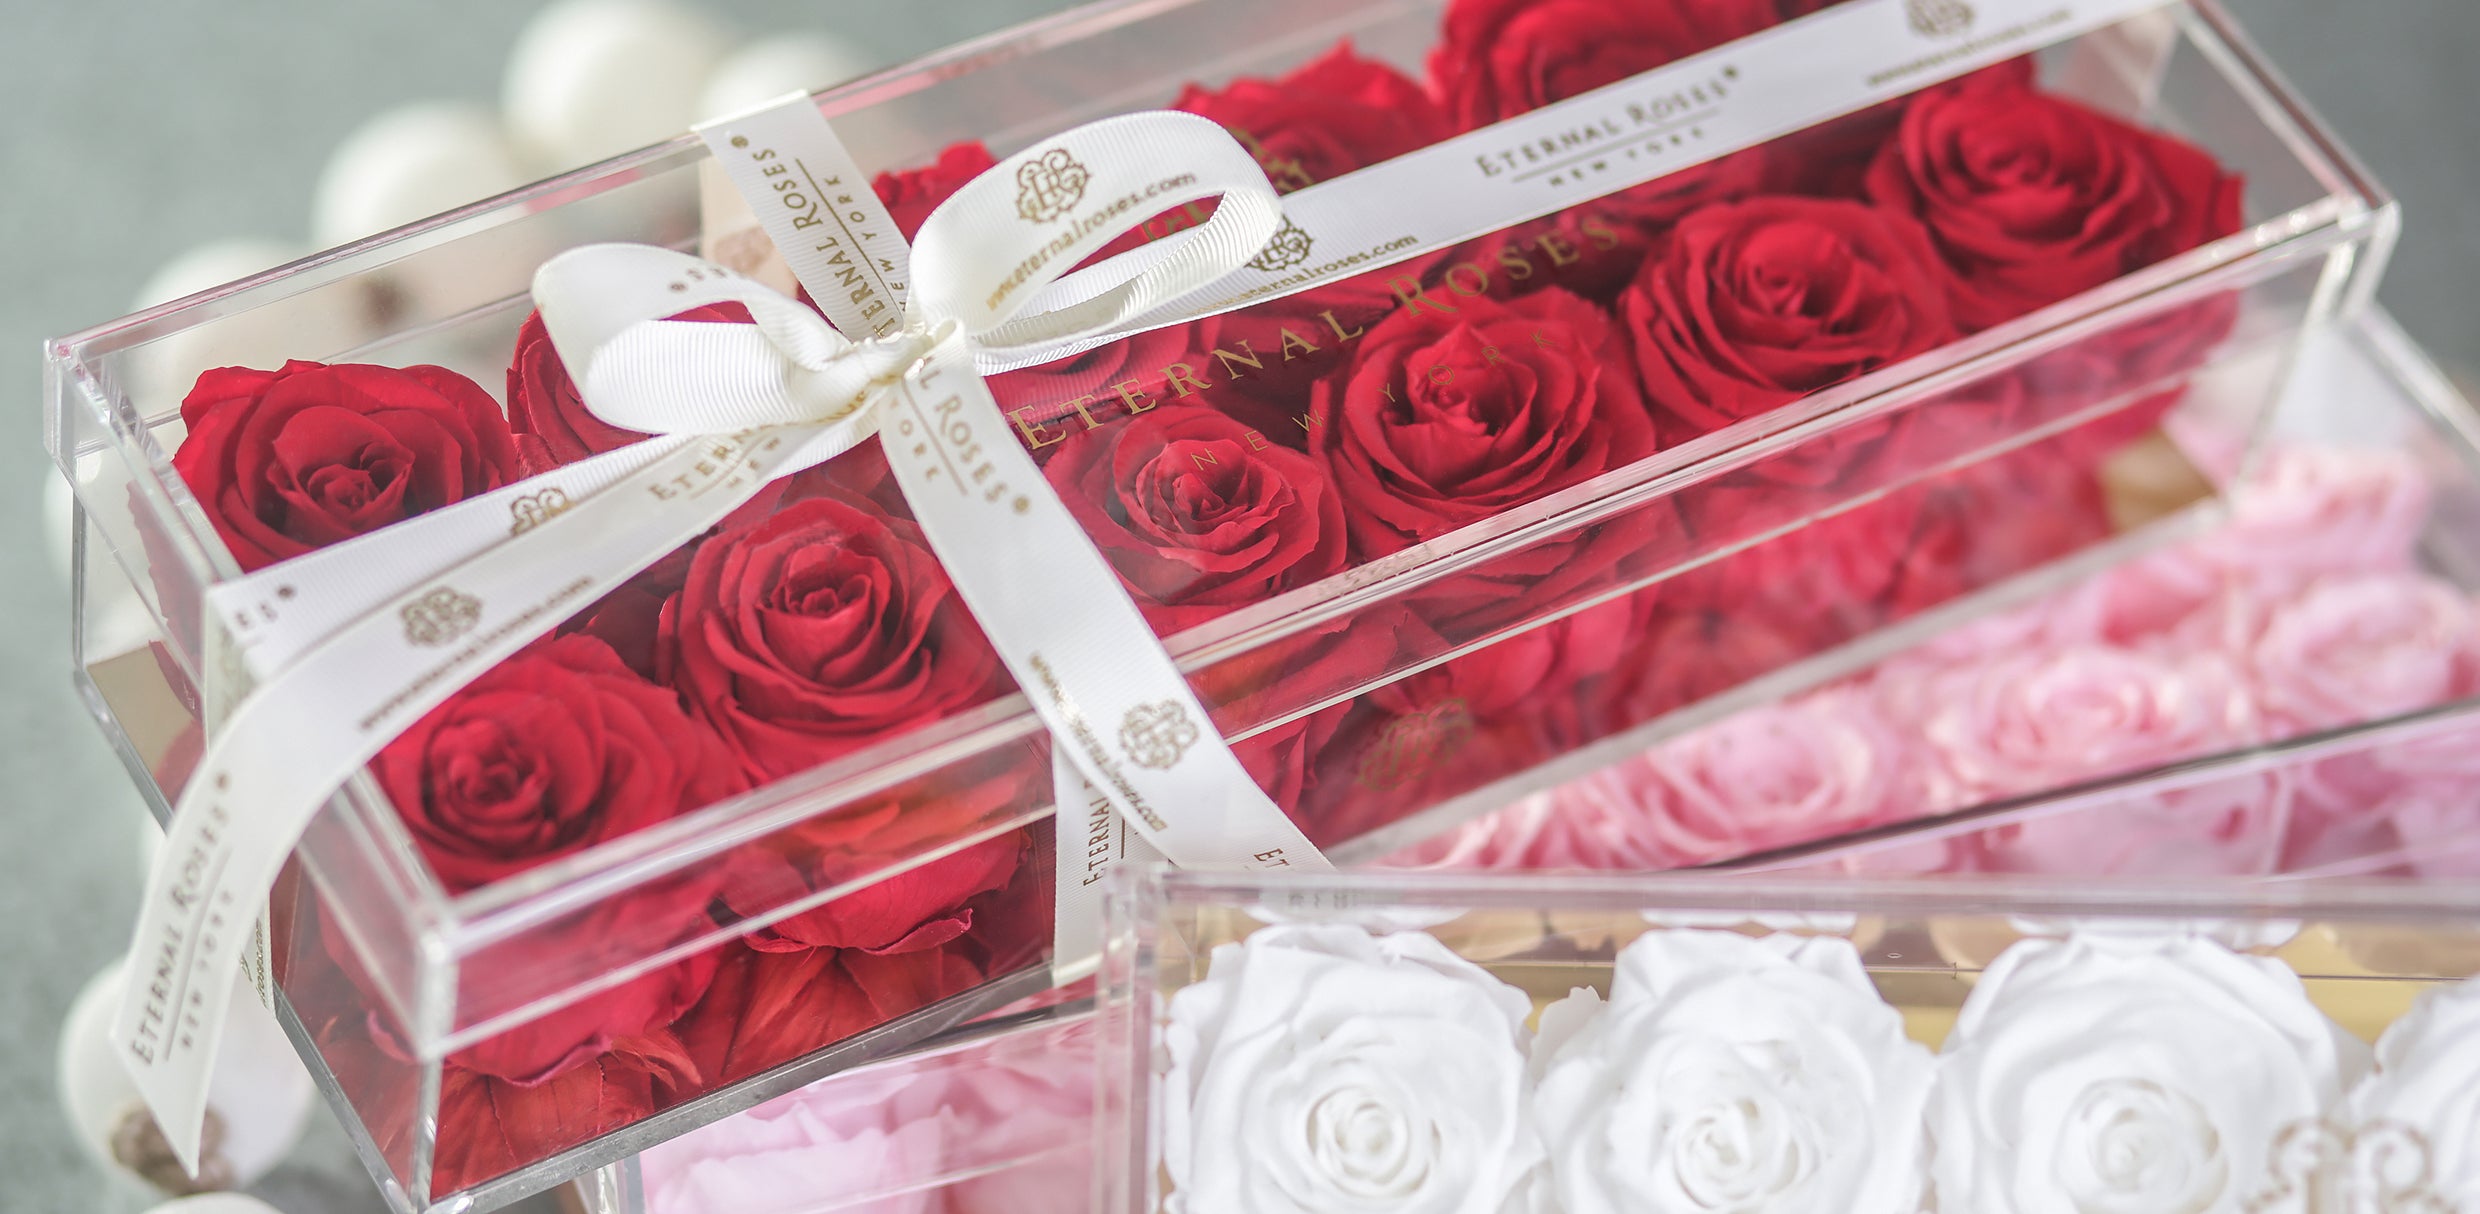 Buy Preserved Roses That Last A Year